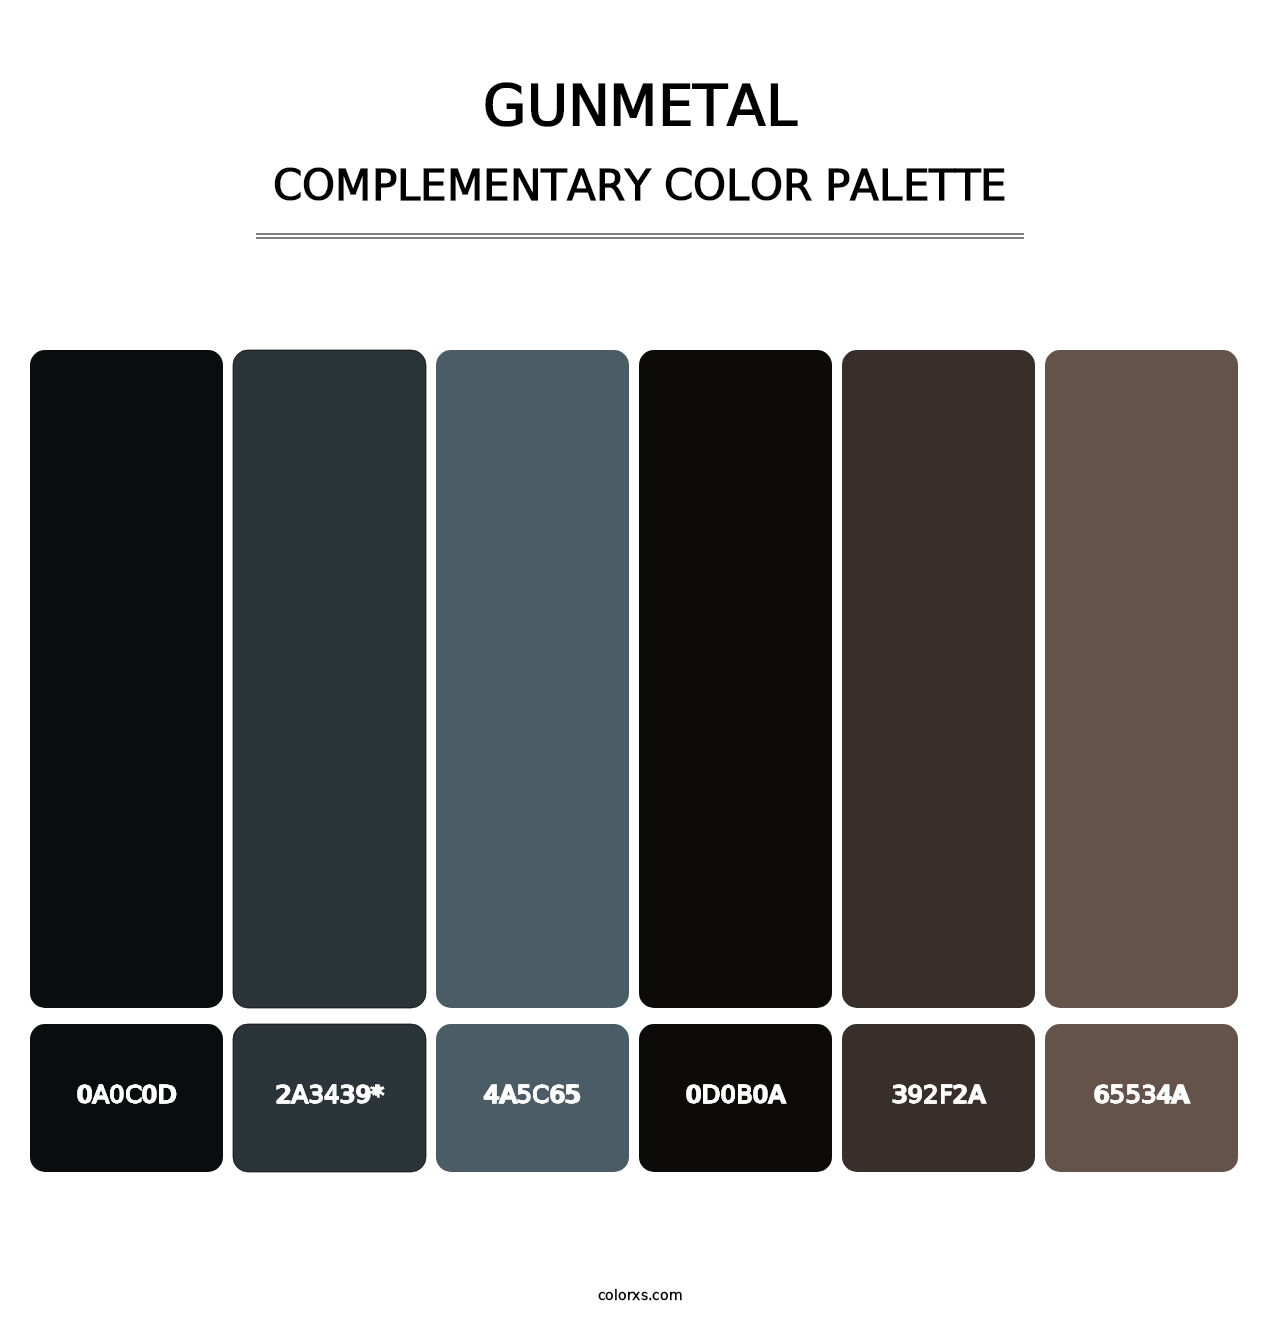 Gunmetal - Complementary Color Palette